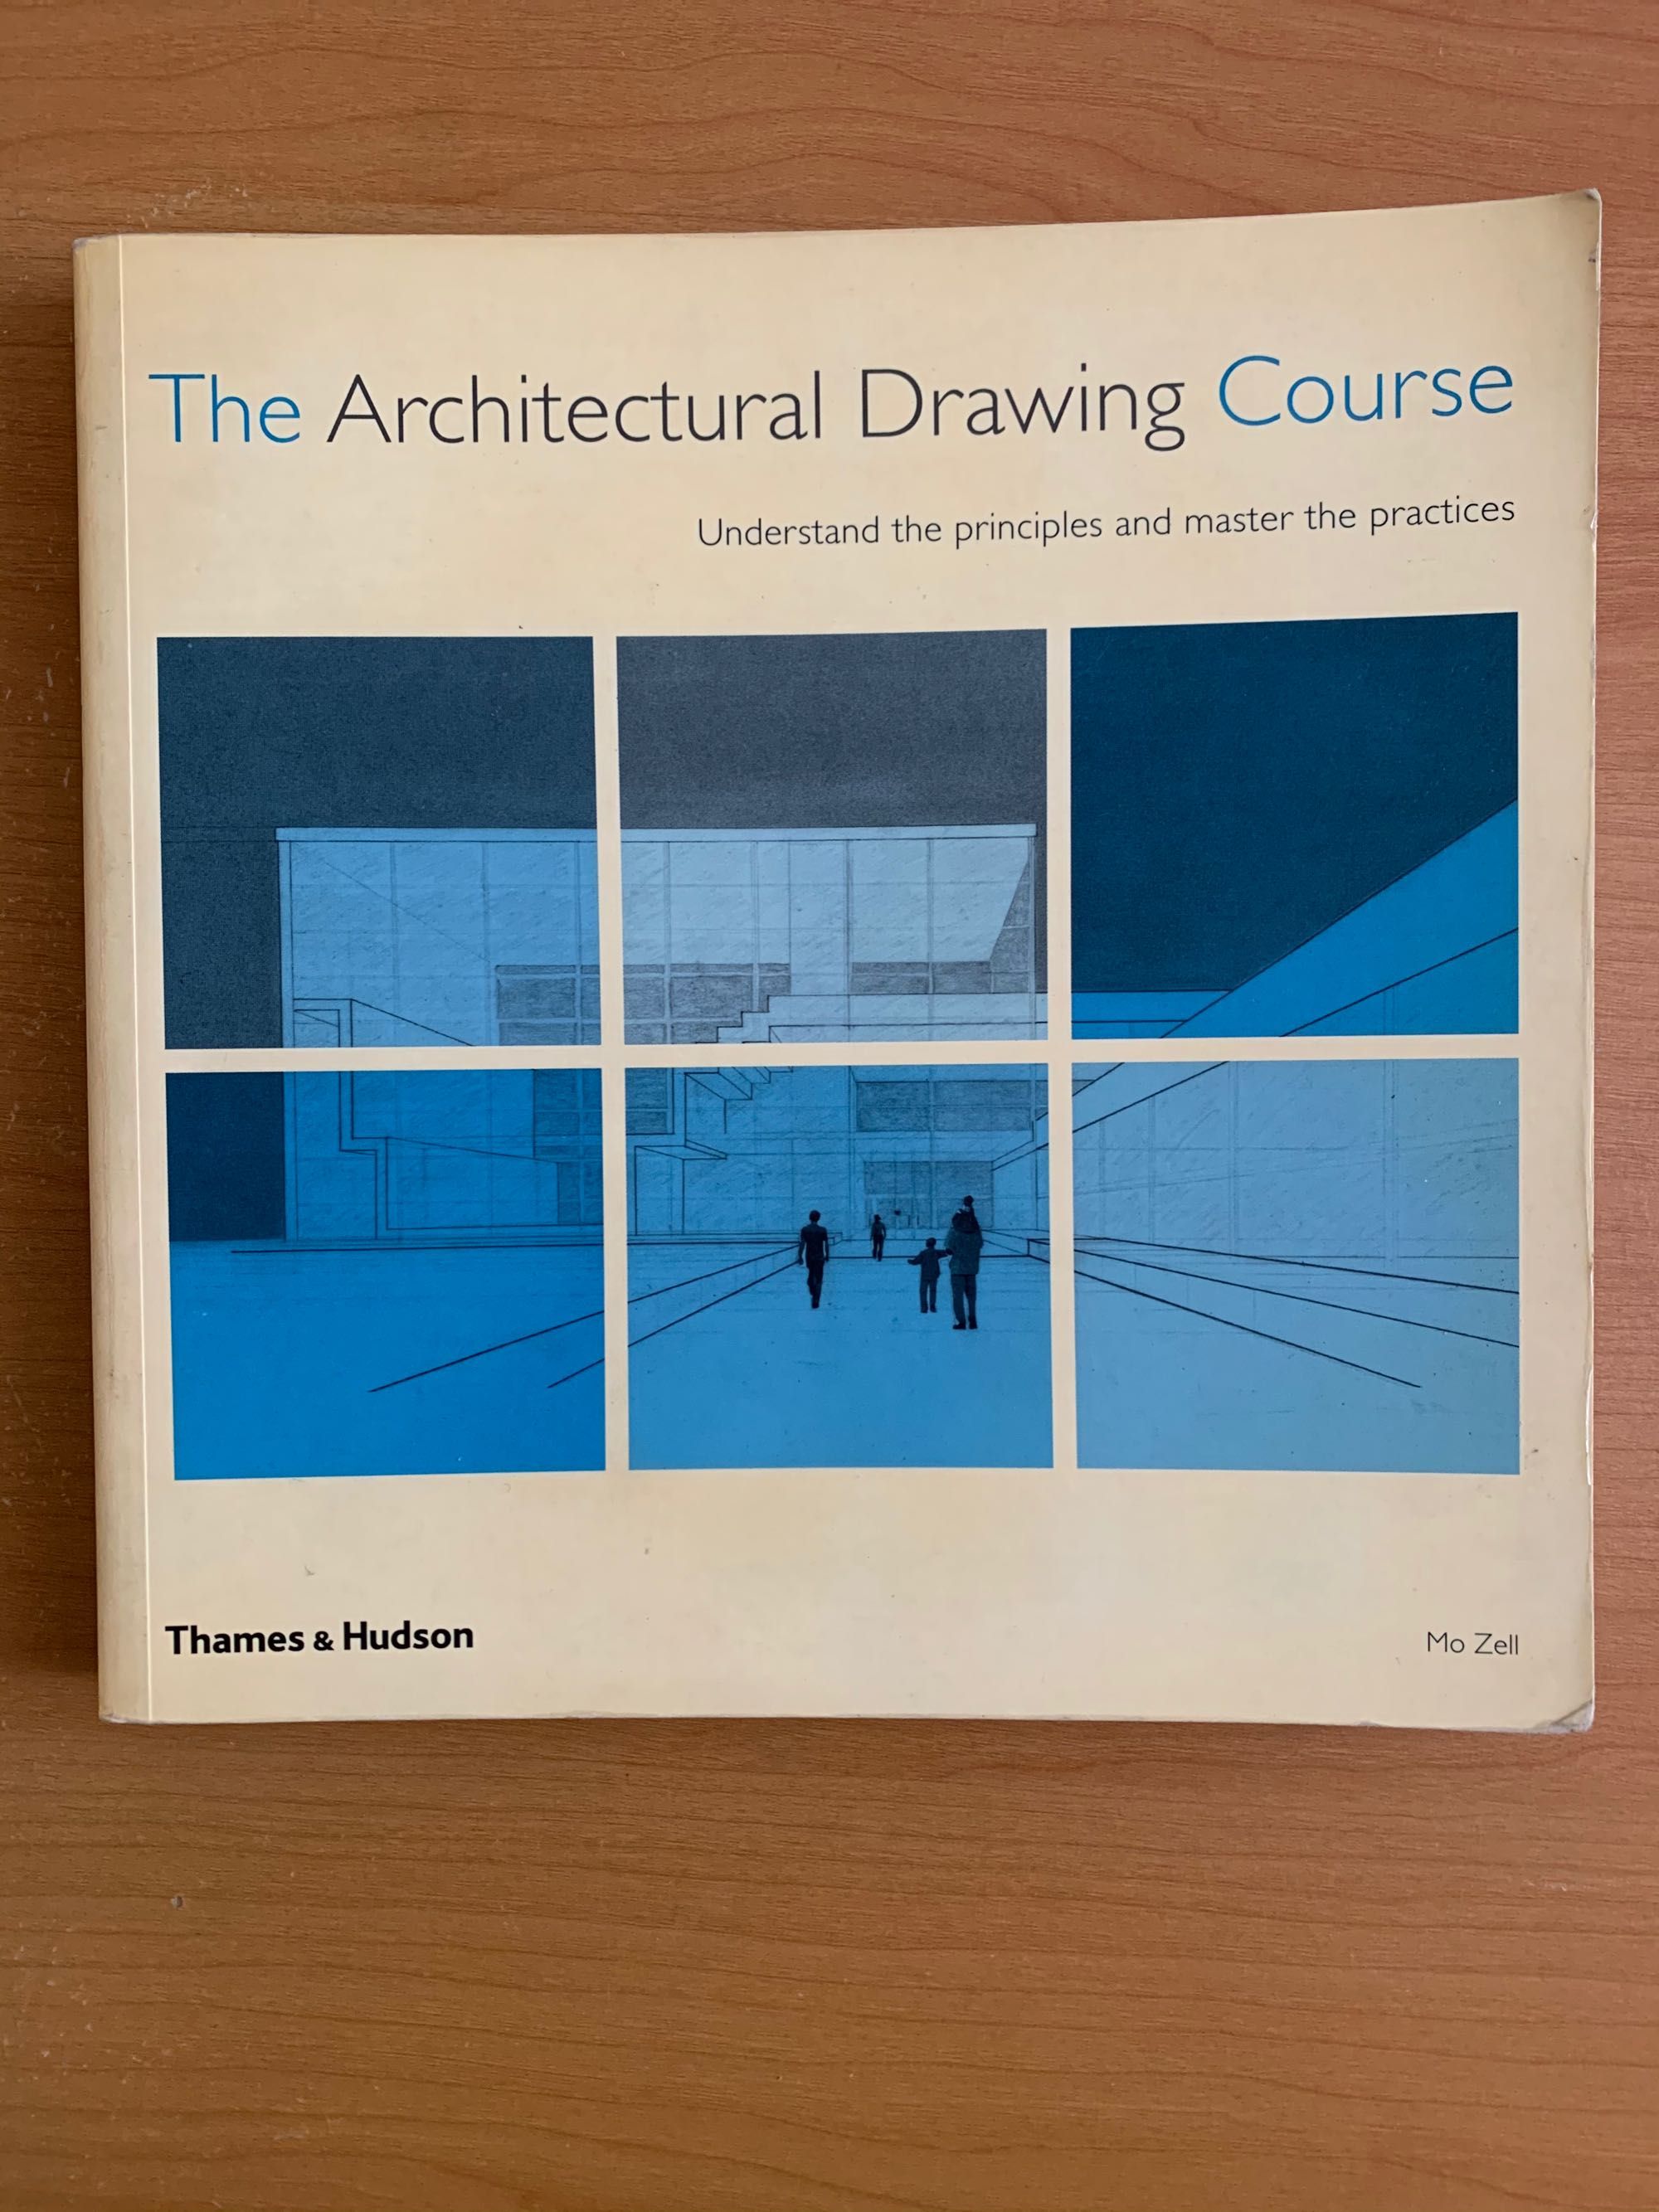 Livro "The Architectural Drawing Course", Mo Zell